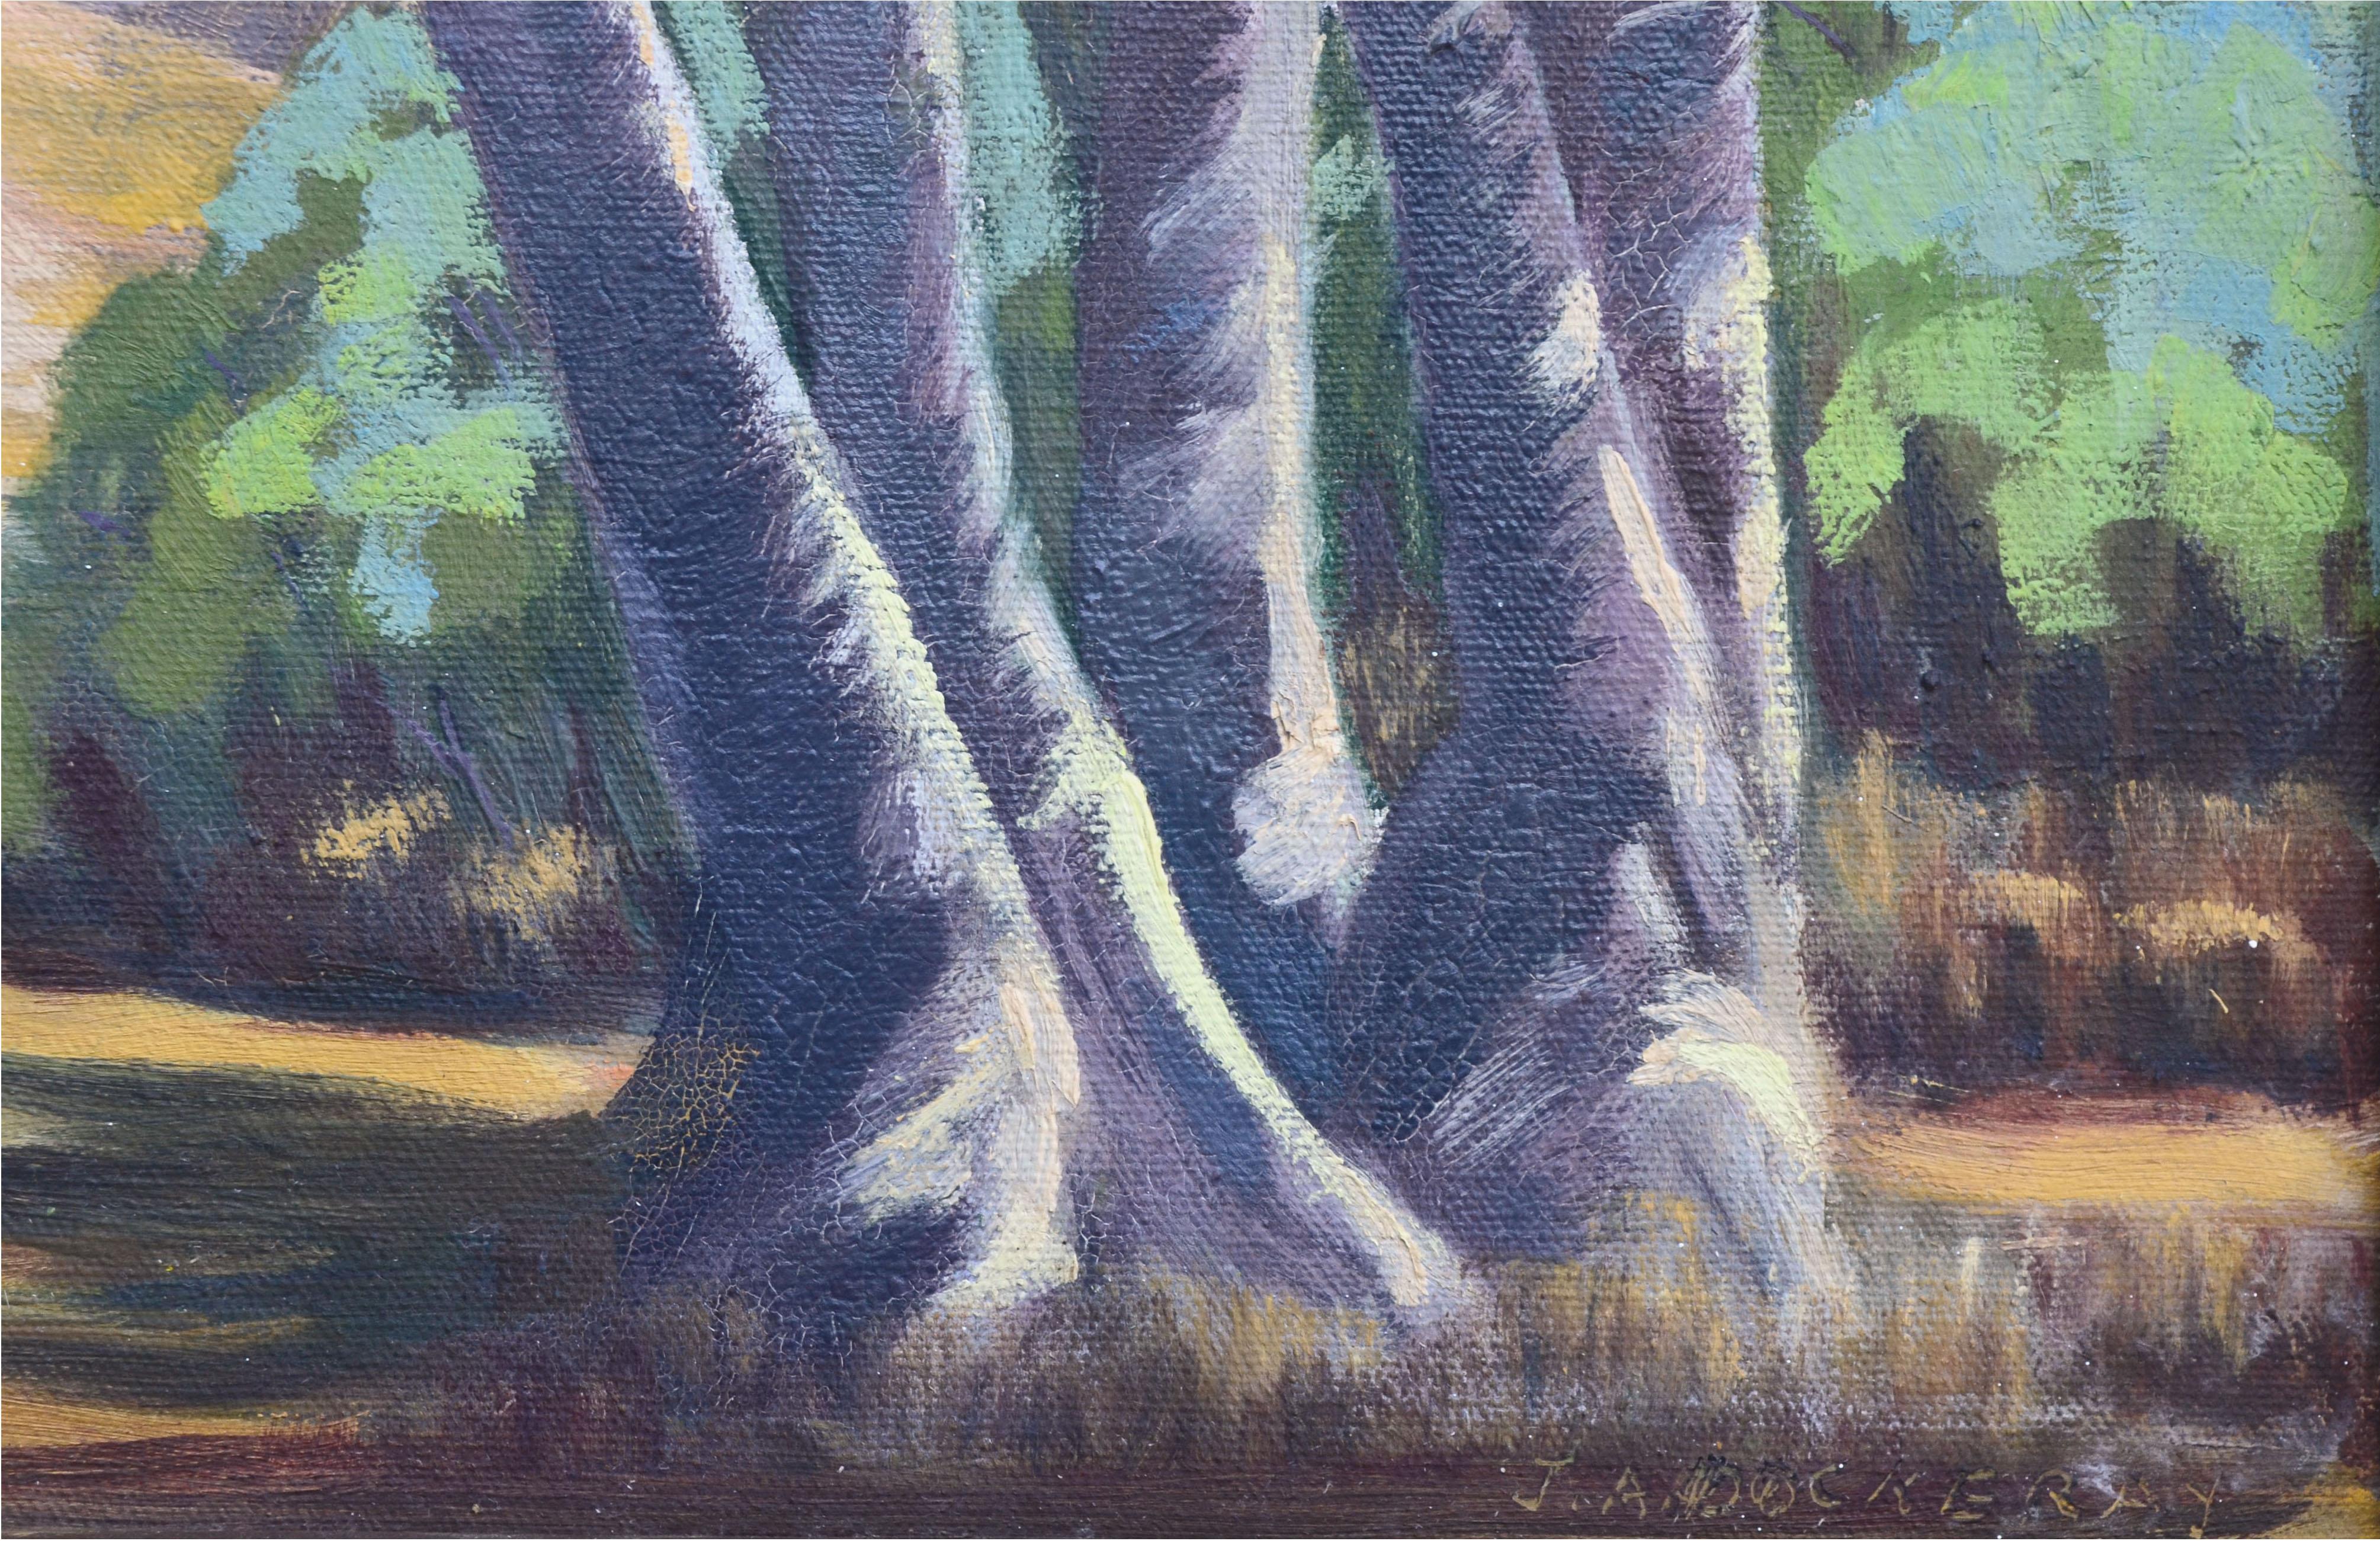 Peaceful and harmonious mid century California landscape depicting rolling foothills dotted with green trees in the soft light of dawn, with a grove of tall birch trees punctuating the foreground and casting their long shadows in the dappled light,